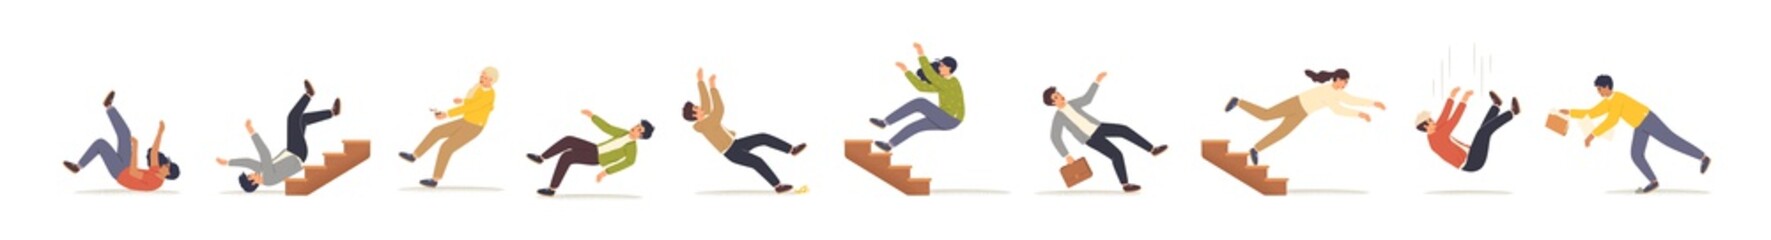 Falling people flat vector illustrations set. Men and women stumbling and falling down stairs cartoon characters. Bad luck, misfortune, fiasco. Business failure, company crash concept.